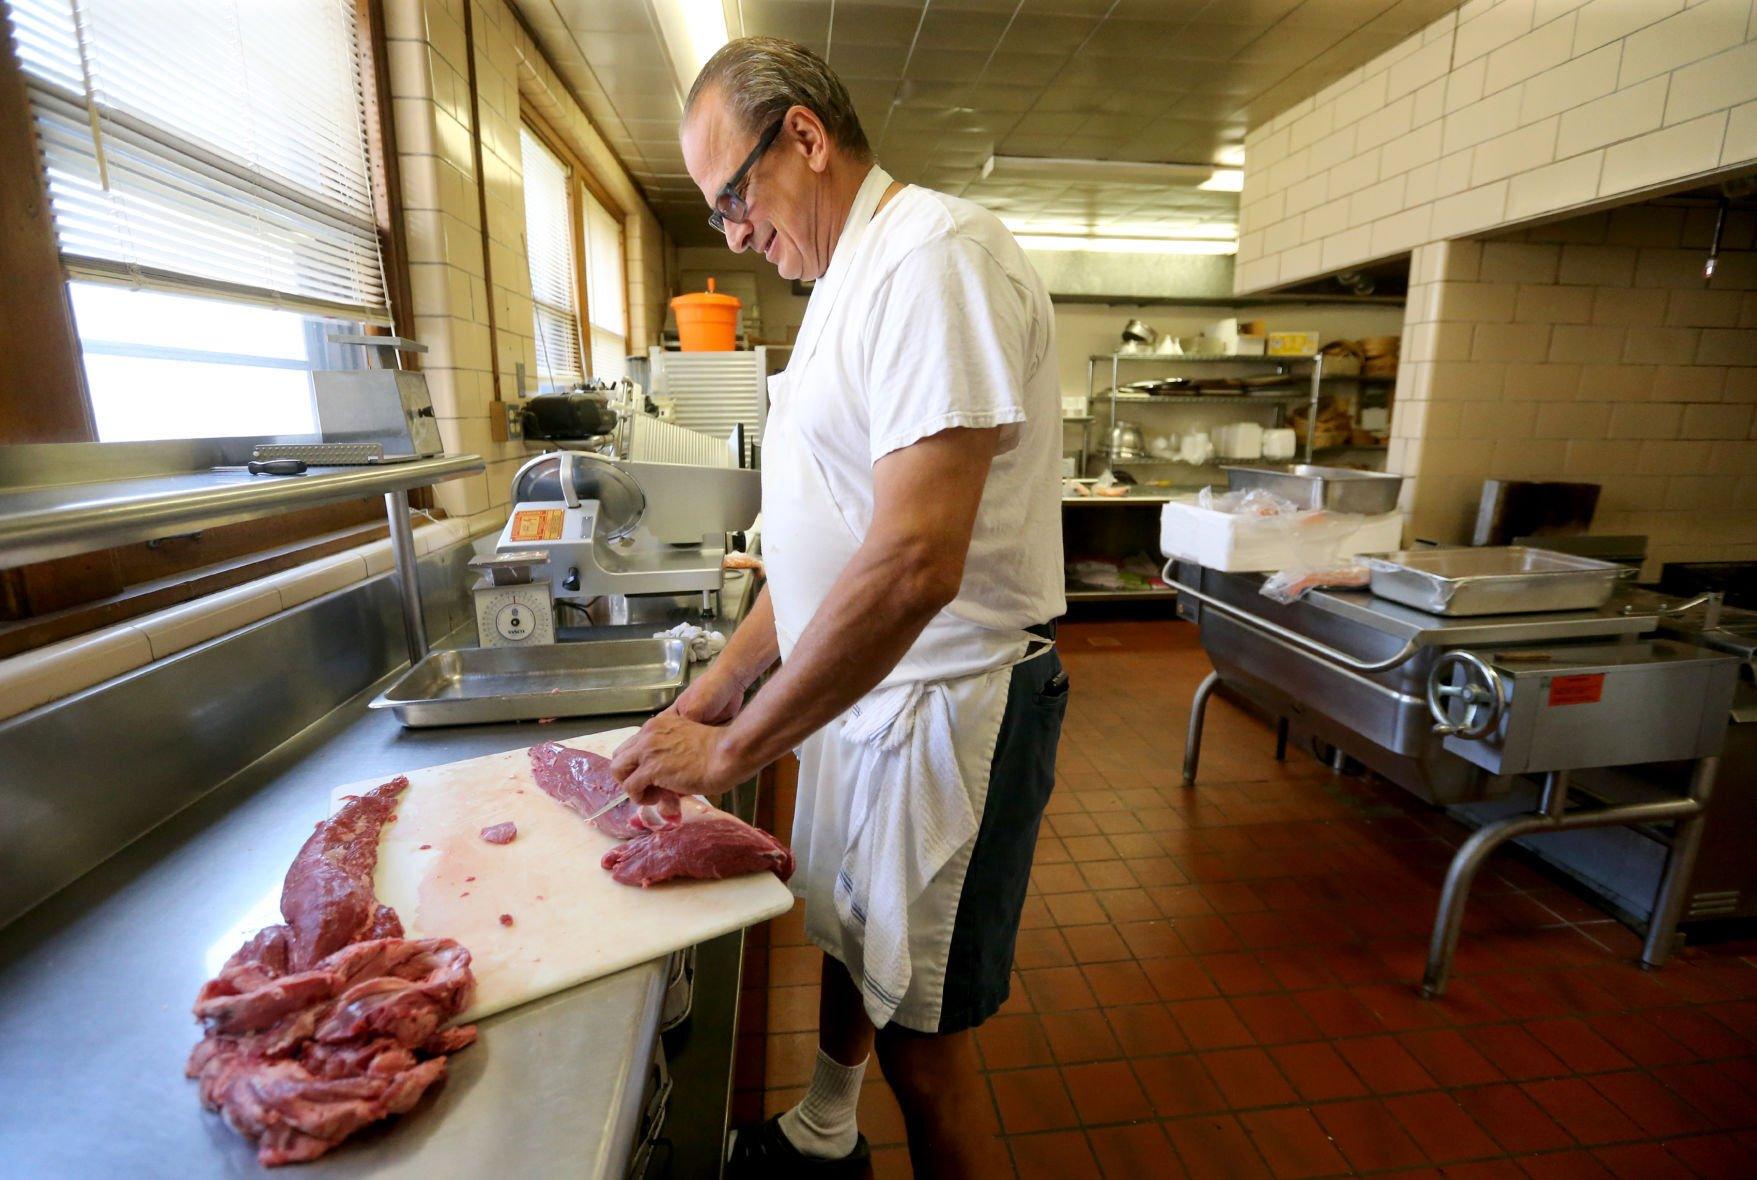 Craig Spielman cuts meat at Creative Catering in Dubuque on Thursday, Sept. 8, 2022.    PHOTO CREDIT: JESSICA REILLY